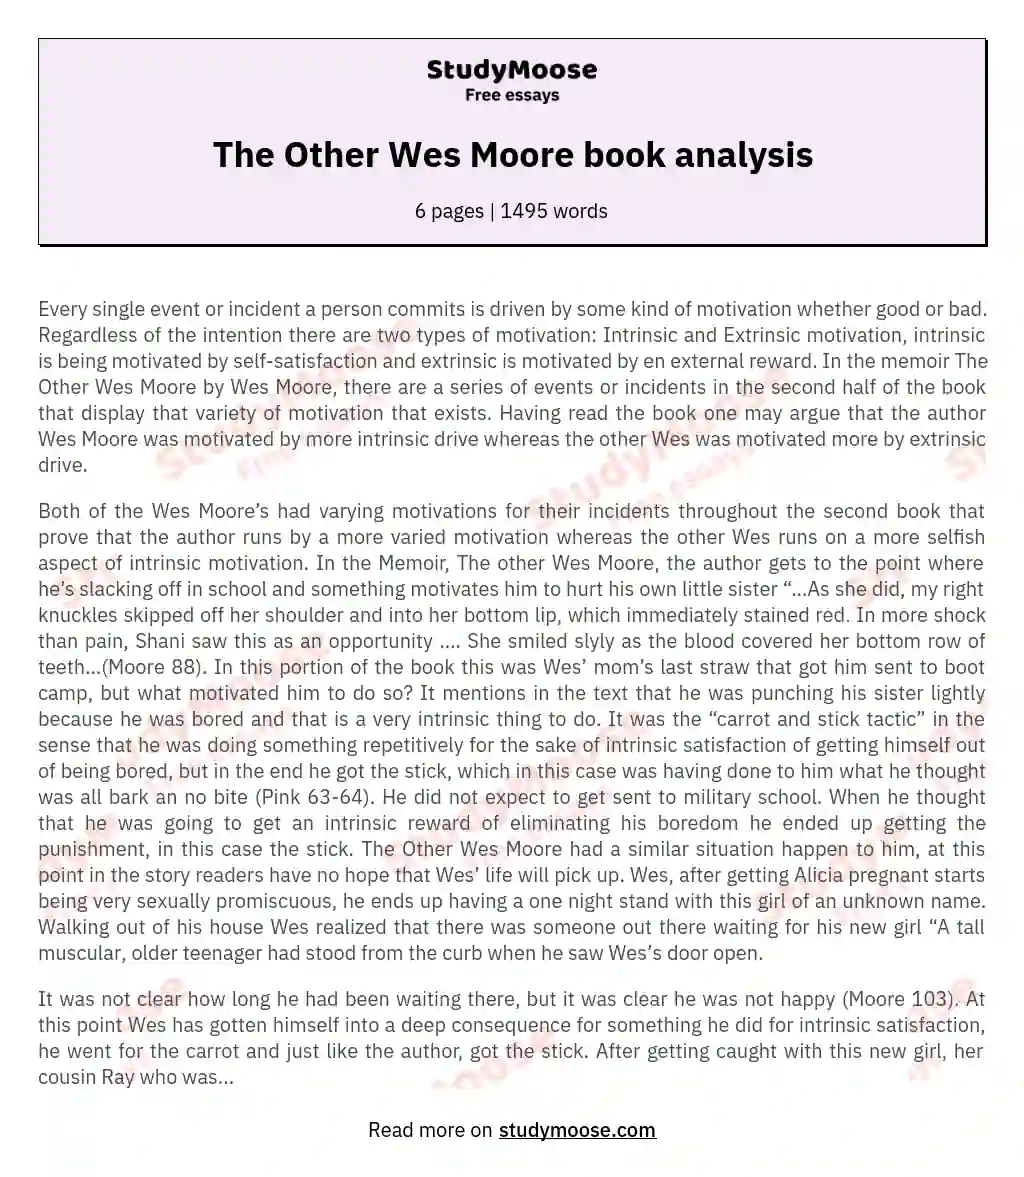 The Other Wes Moore book analysis